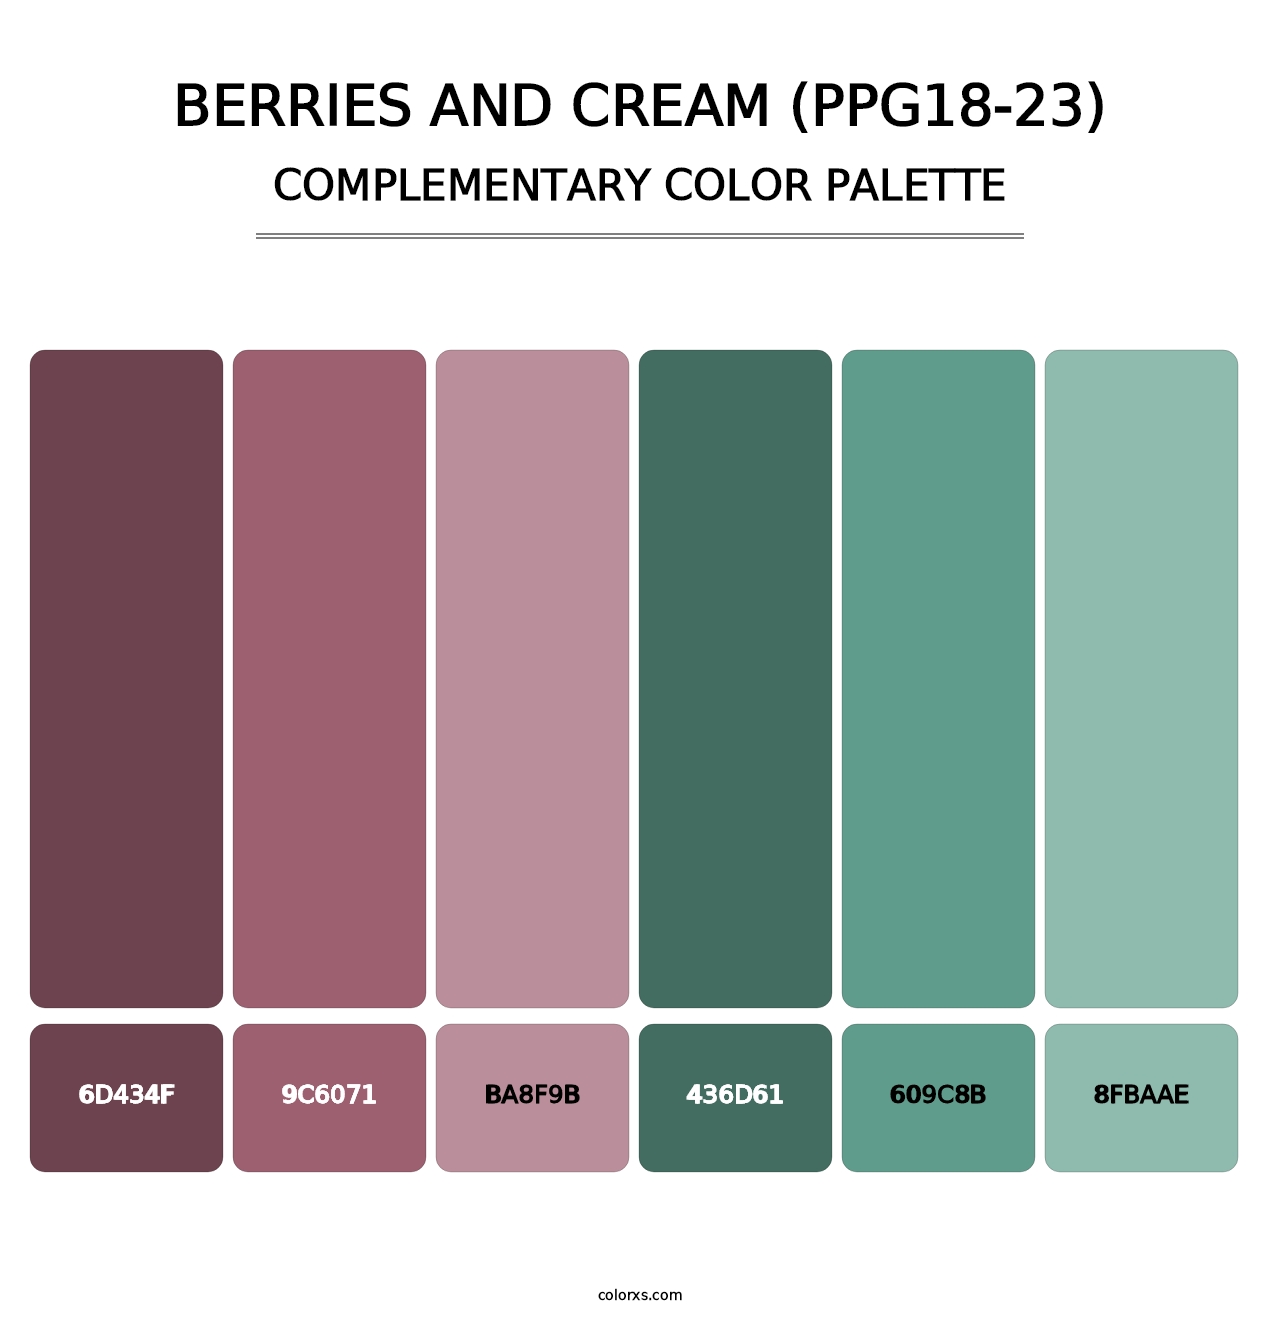 Berries And Cream (PPG18-23) - Complementary Color Palette